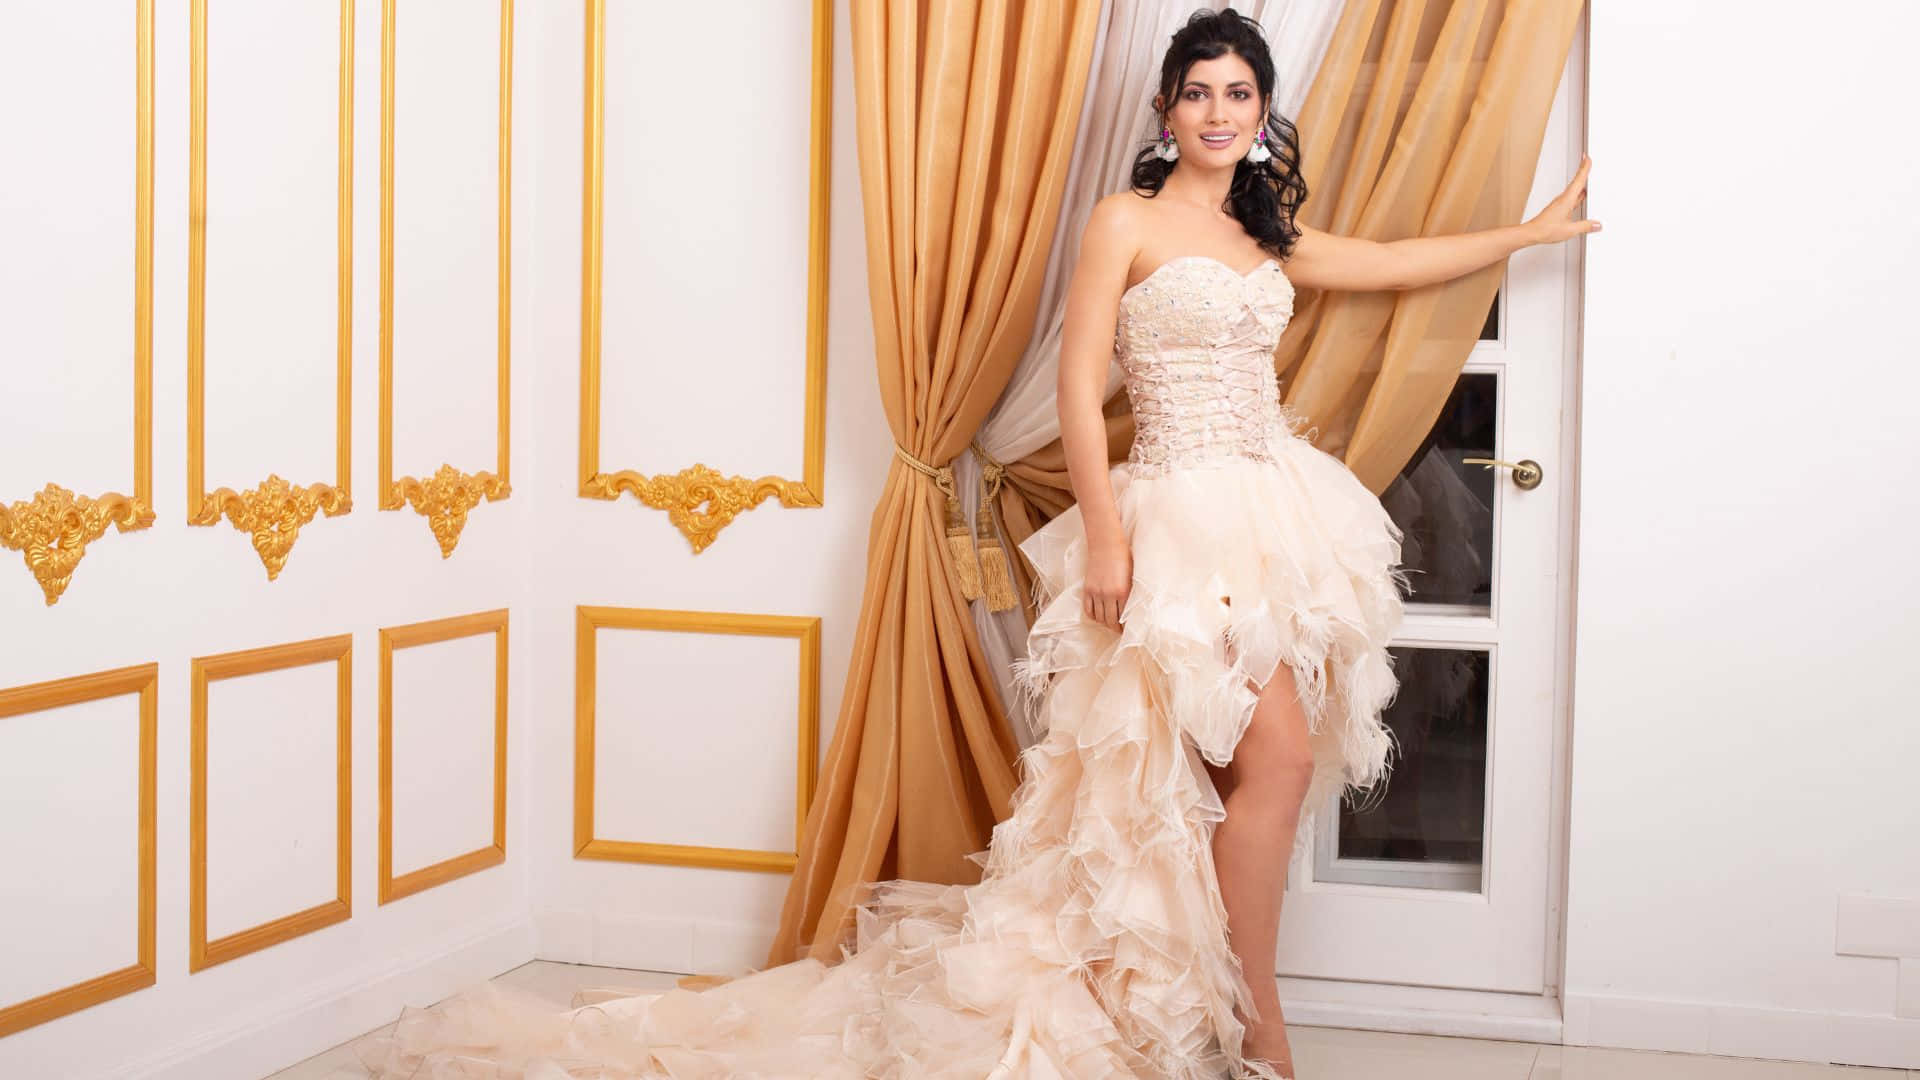 A Woman In A Wedding Dress Posing In Front Of A Door